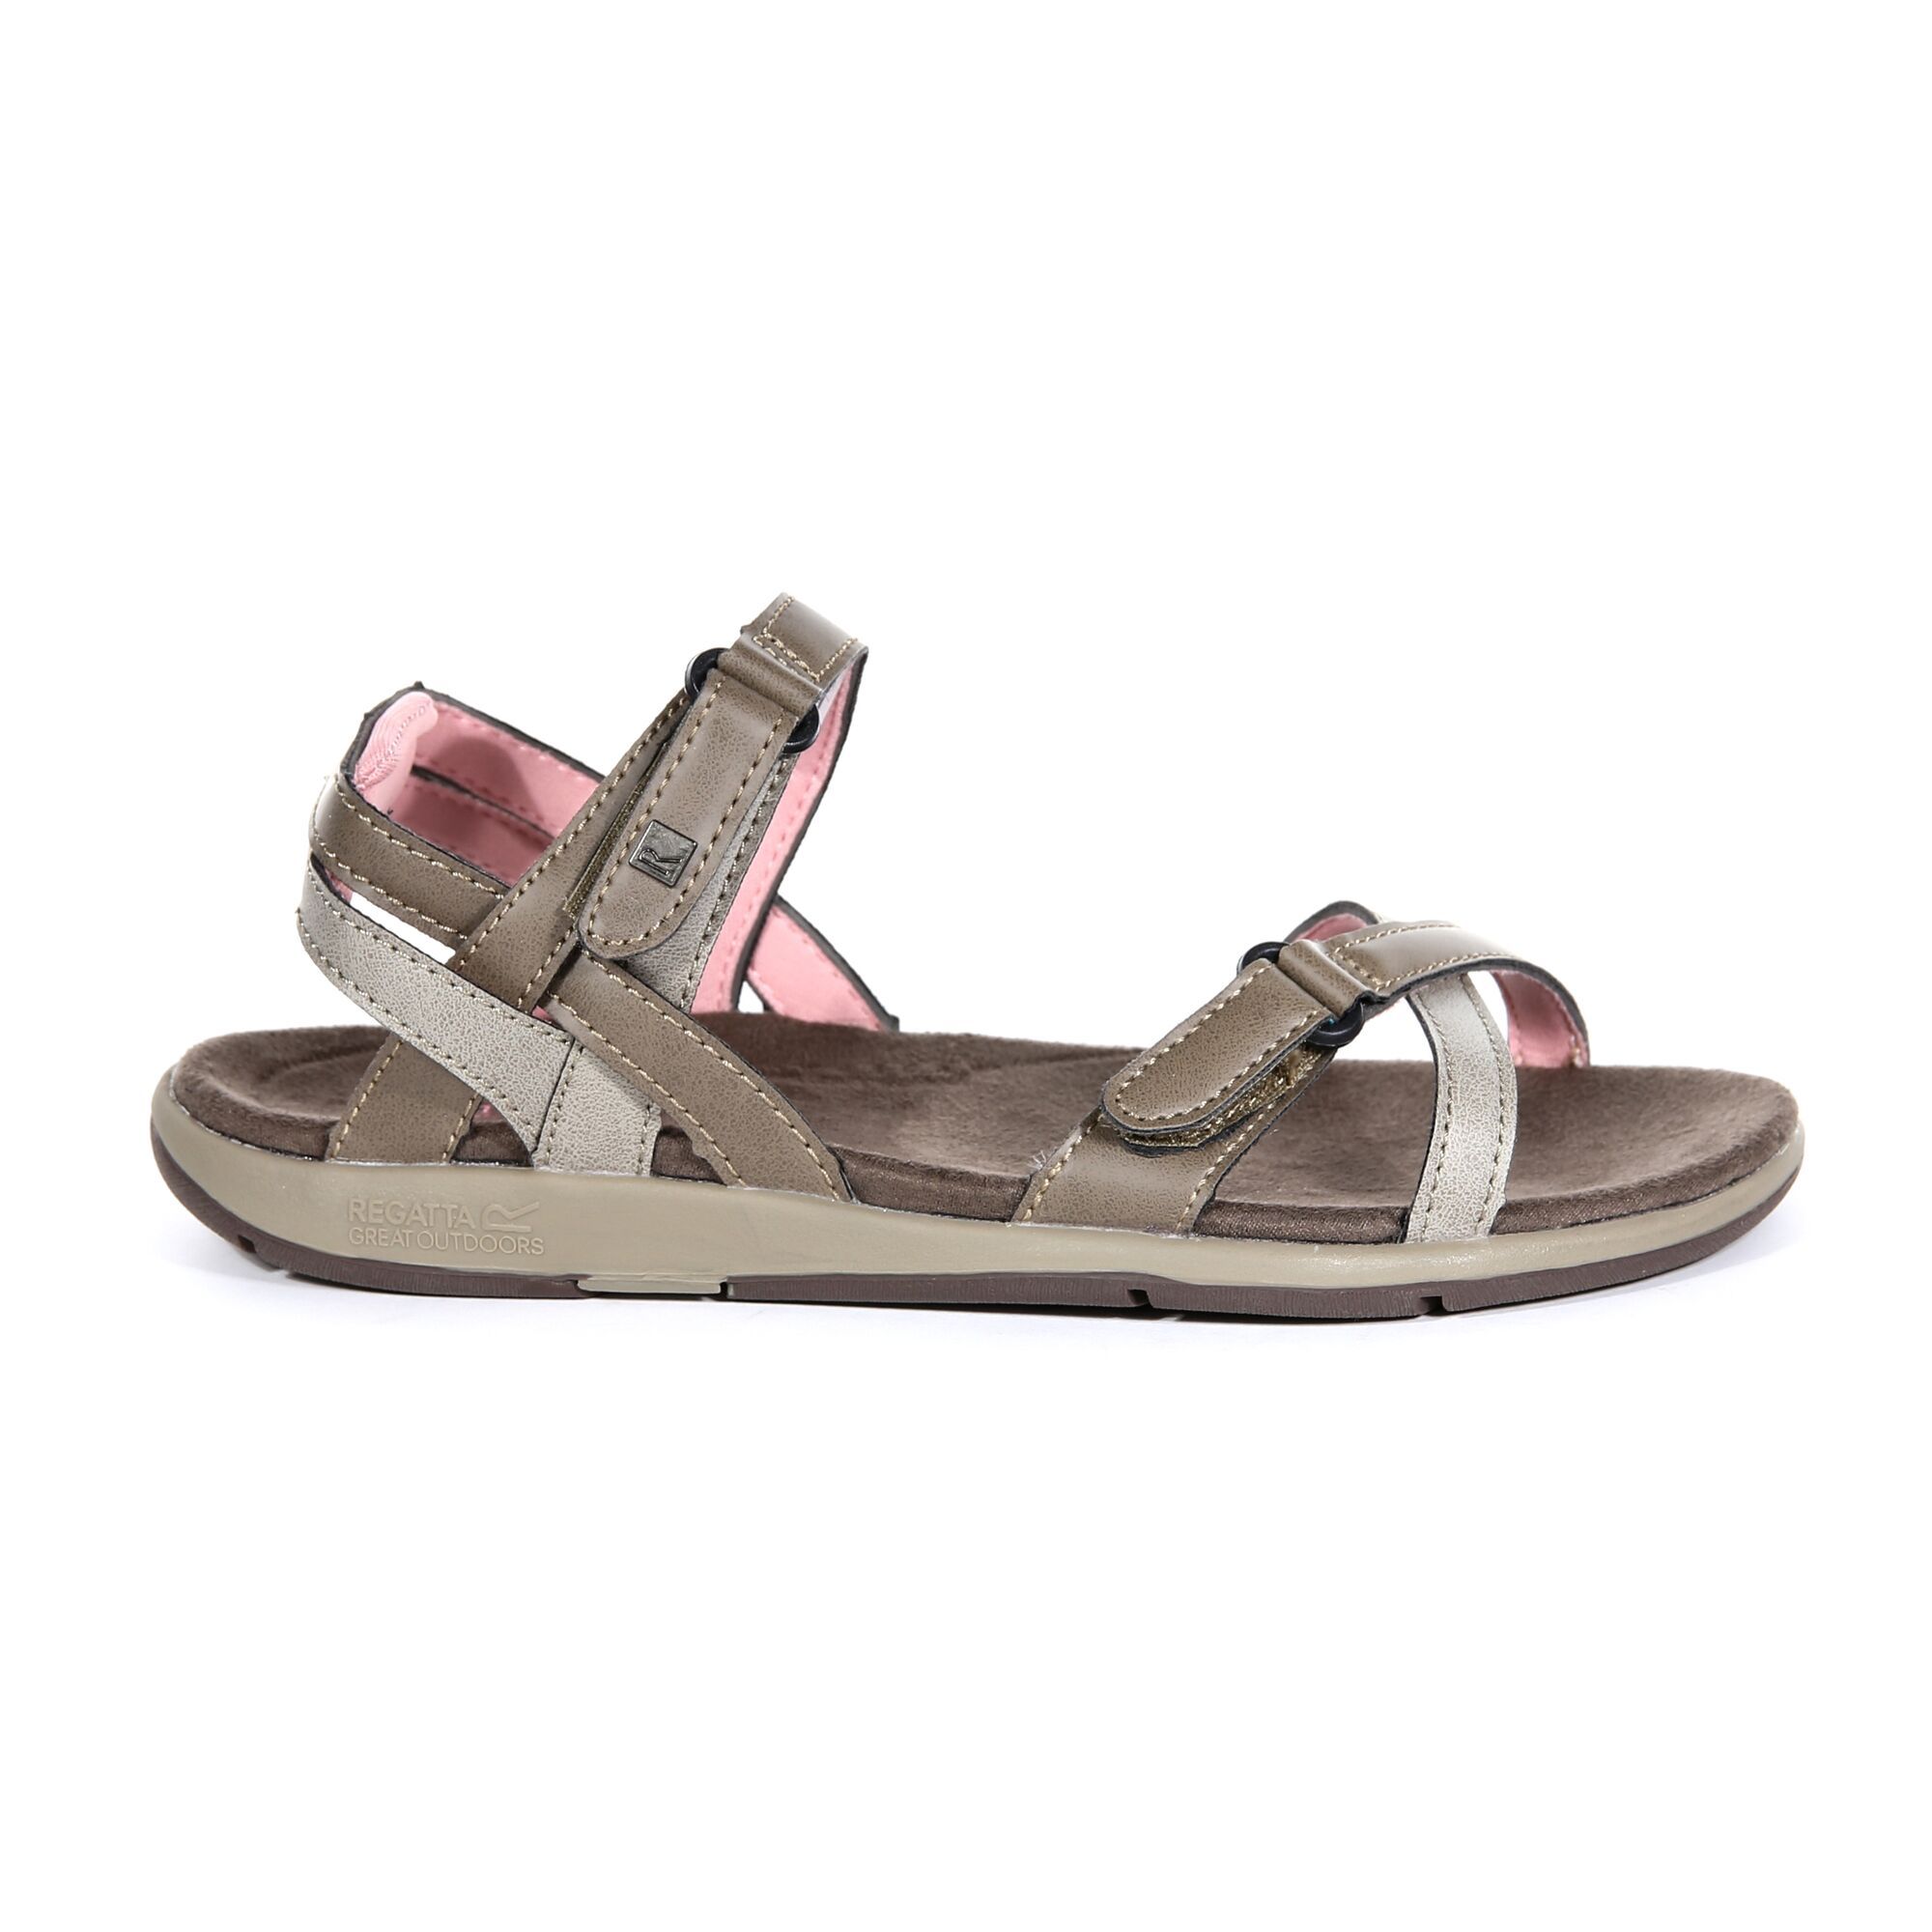 The Lady Santa Cruz is our summery everyday sandal with a stylish criss-cross design and adjustable straps for the perfect fit. The robust rubber outsole offers fantastic grip on pebbly beaches and uneven paths while the EVA-cushioned midsole provides plenty of shock absorption for all-day comfort in wear. We added a soft and stretchy spandex lining and a light textile covering on the footbed to help prevent any nasty rubbing. Polyamide 5%, Other Fibres/Materials 95%.